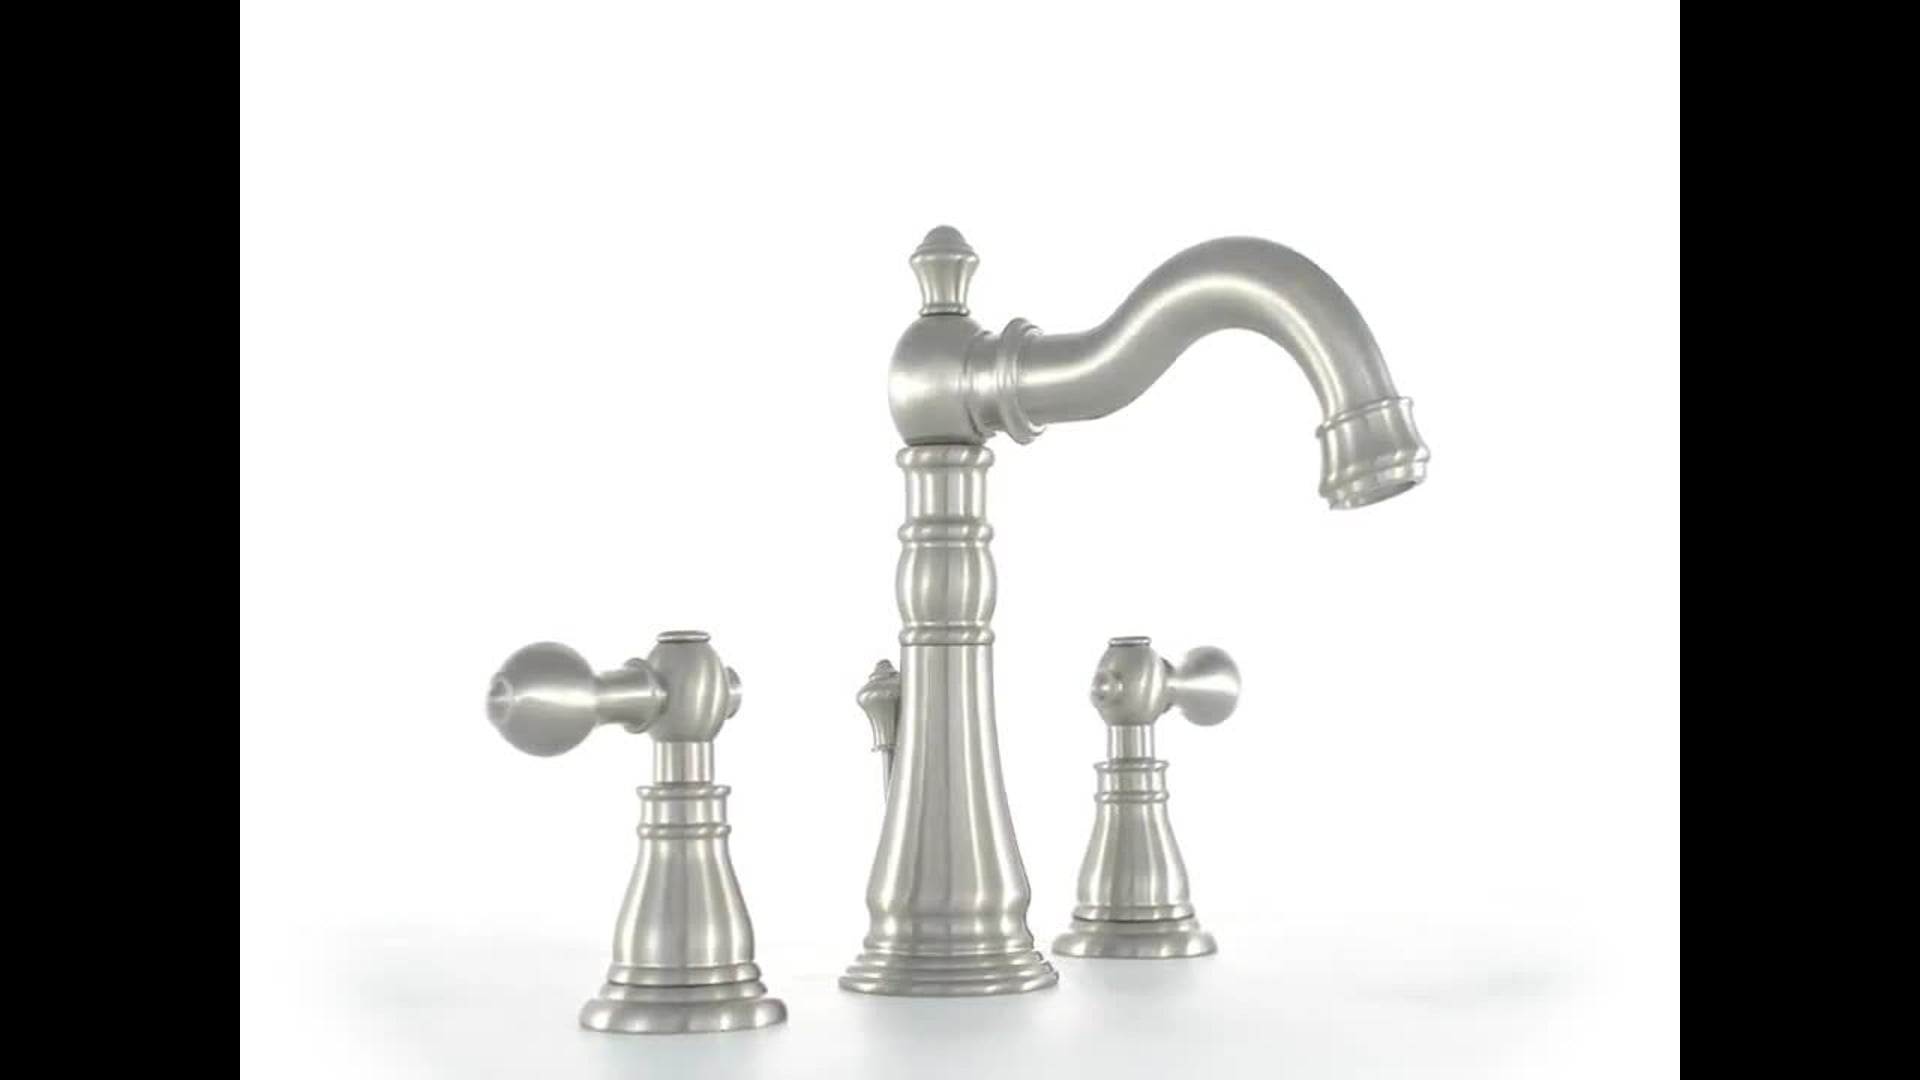 Fauceture Widespread Bathroom Faucet With Retail Pop-Up, Brushed Nickel